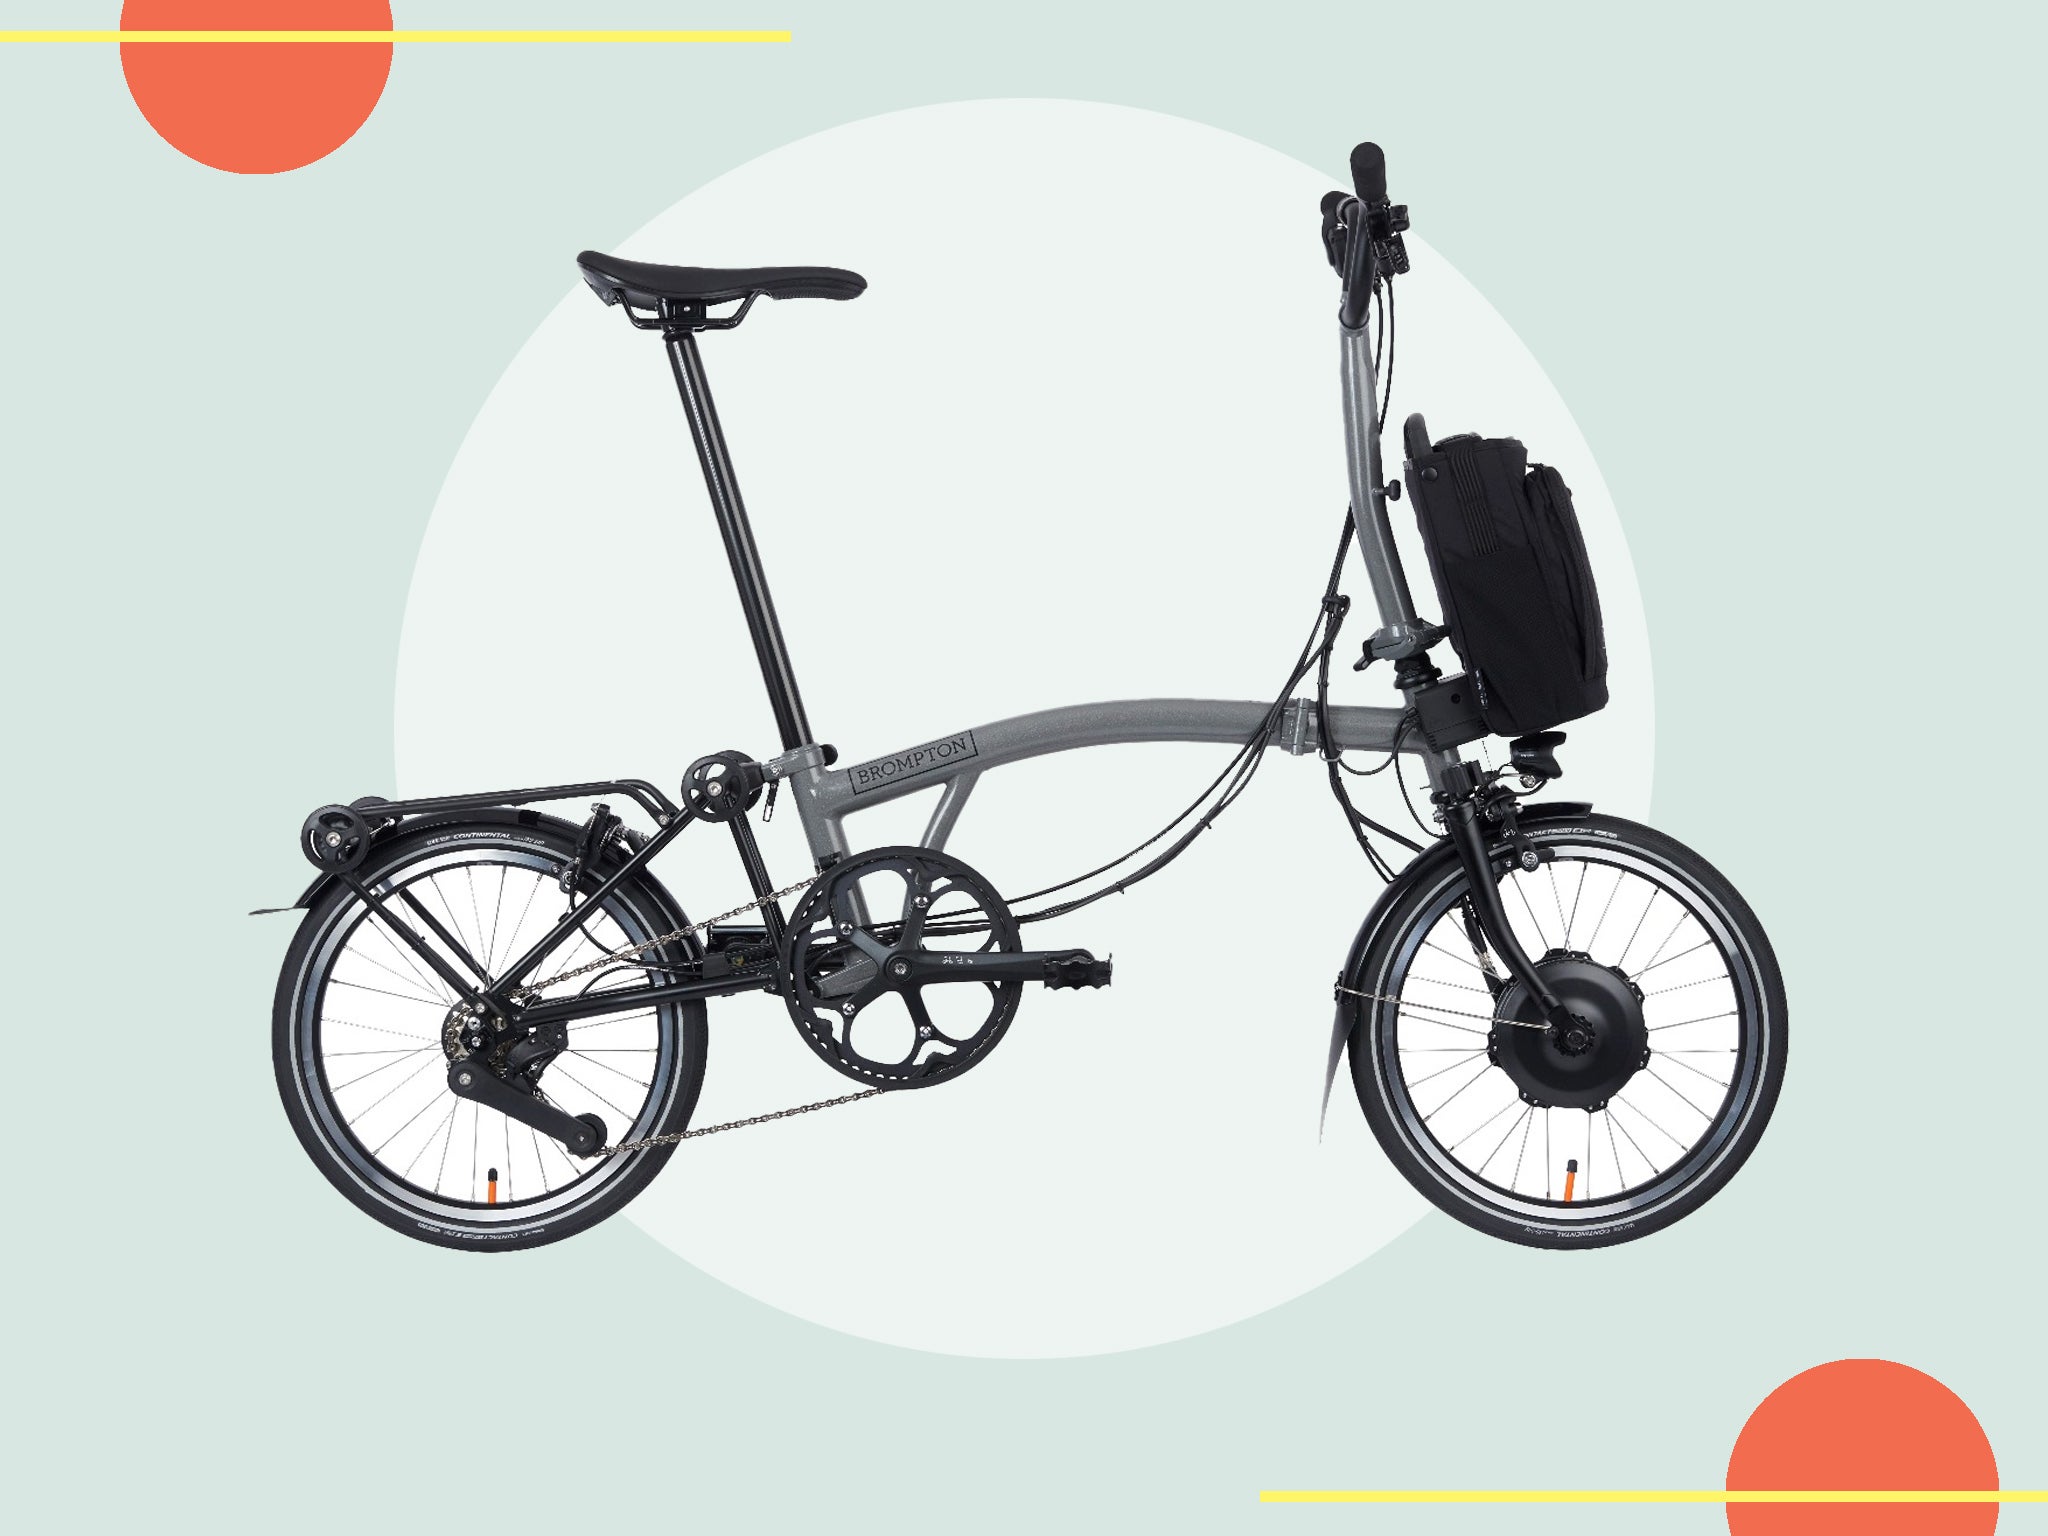 The bike is available in black and grey, with and without the luggage rack